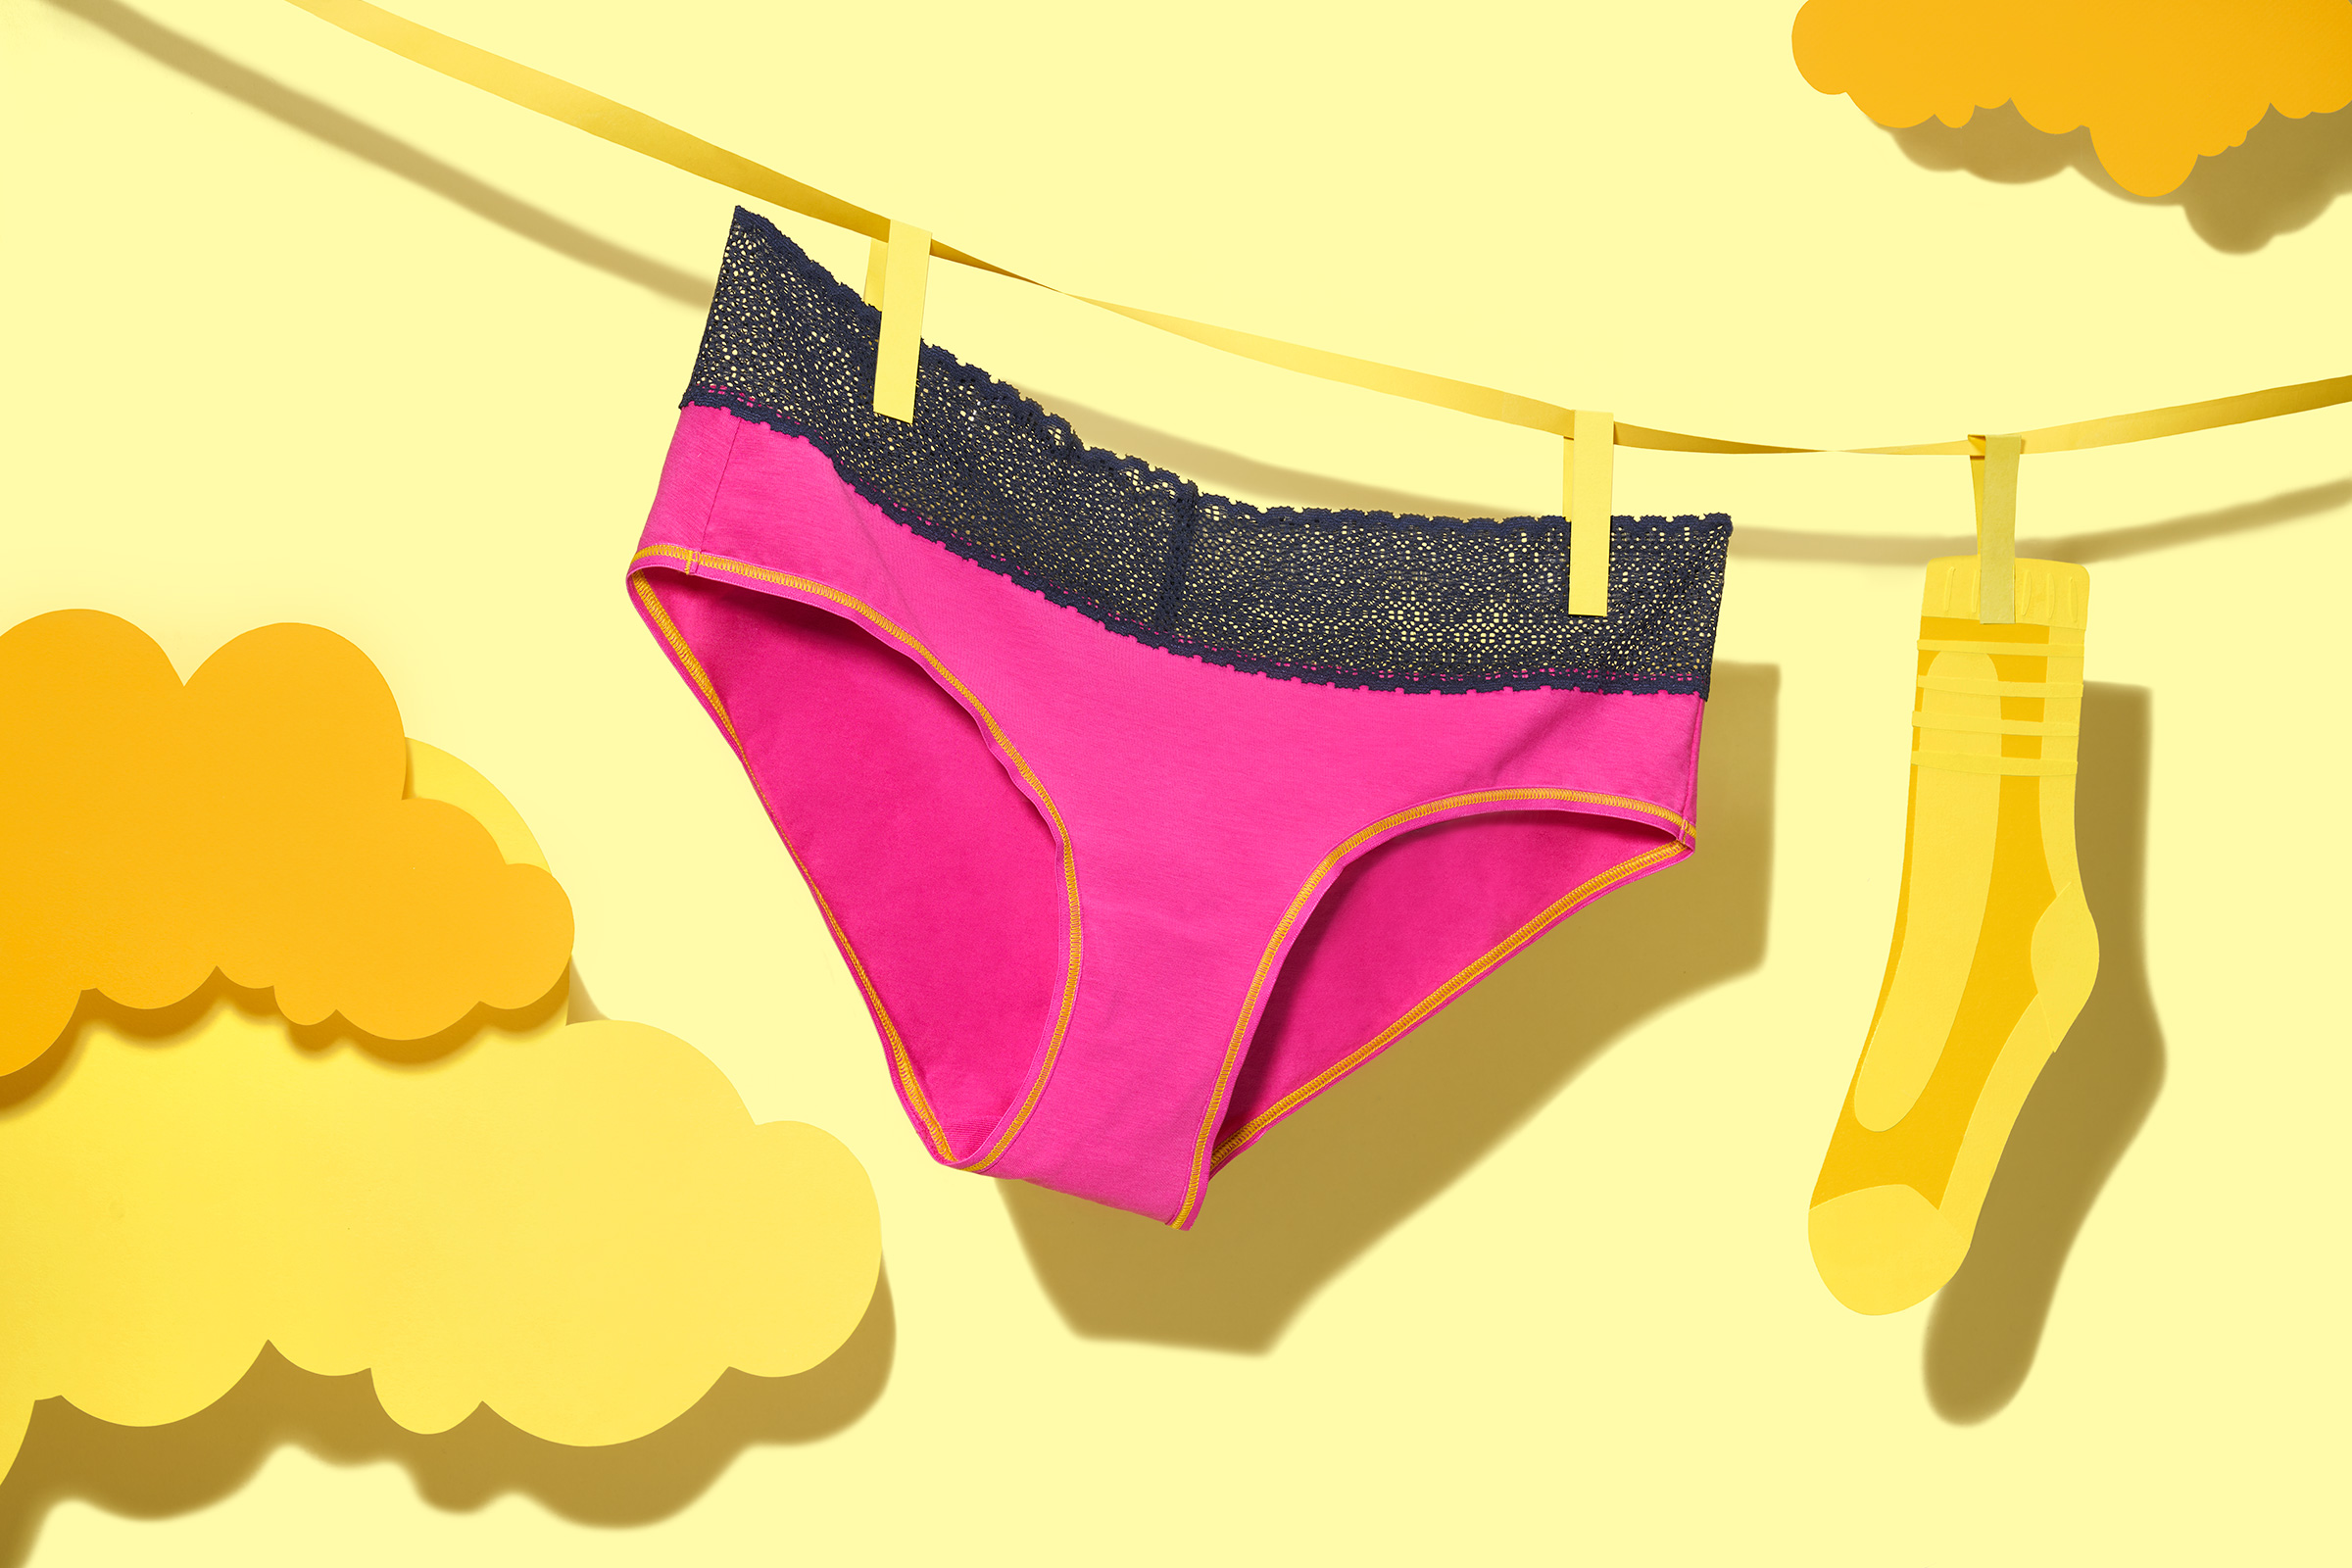 Bombas Underwear: The 100 Best Inventions of 2021